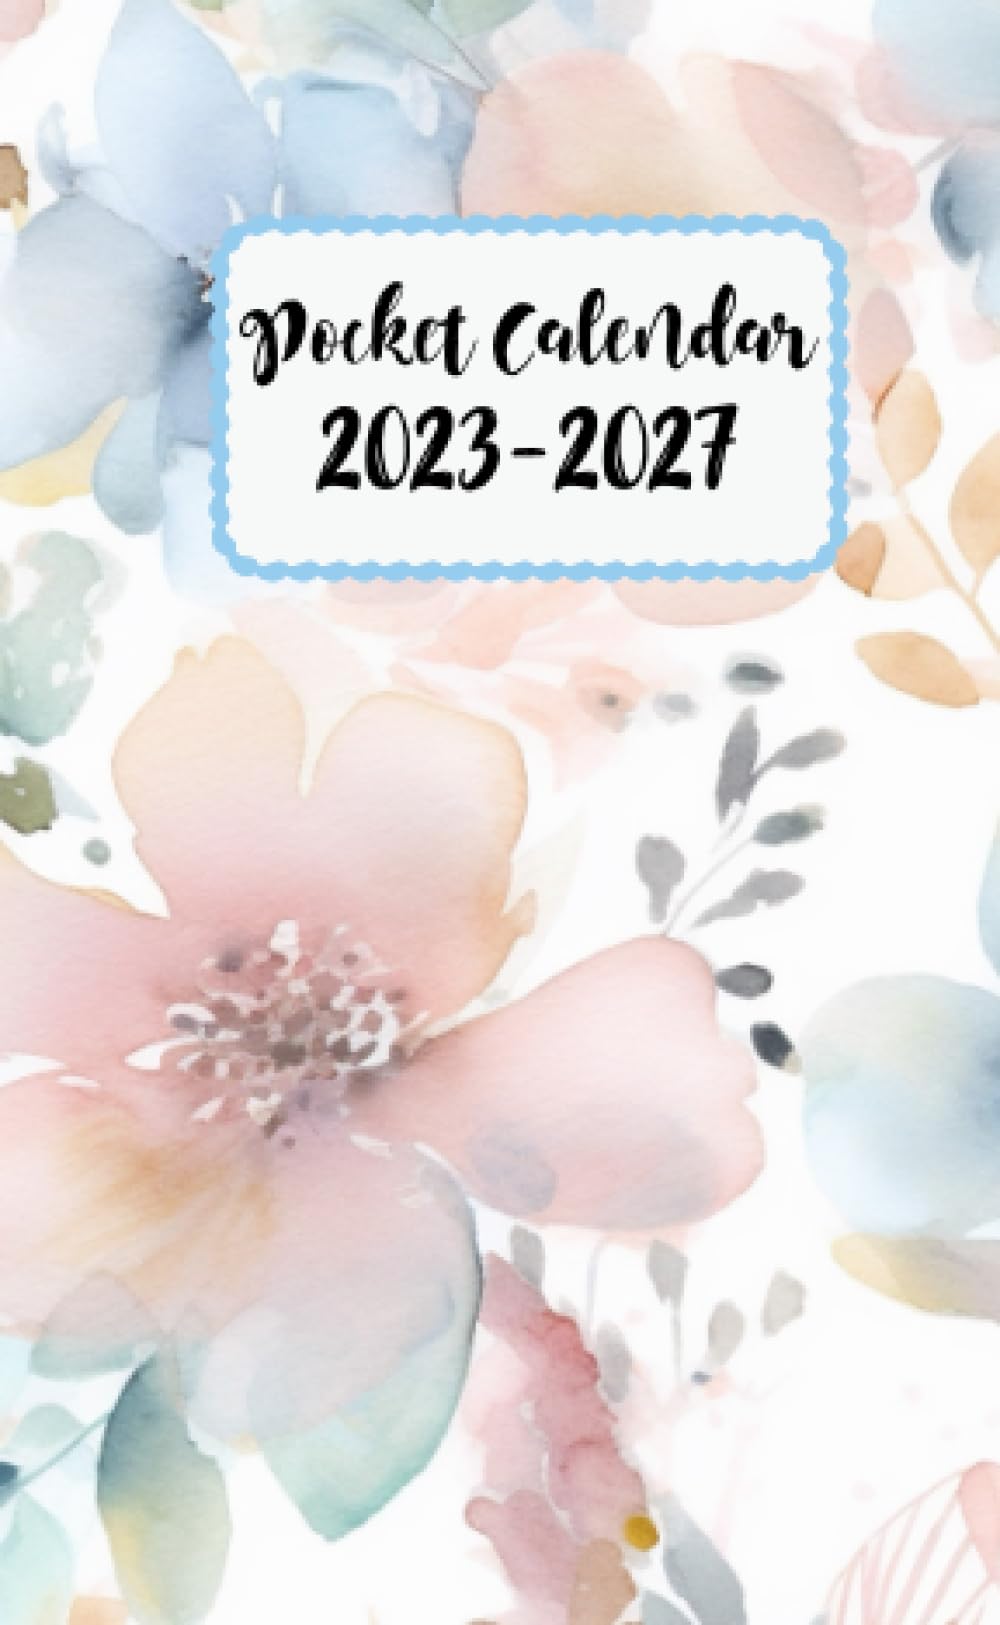 Pocket Calendar Planner 2023-2027 For Purse: 5 Years From July 2023 To December 2027 | Floral Cover | Appointment Calendar Purse Size 4 x 6.5 | 54 ... , Birthdays | Contact List | Password Keeper